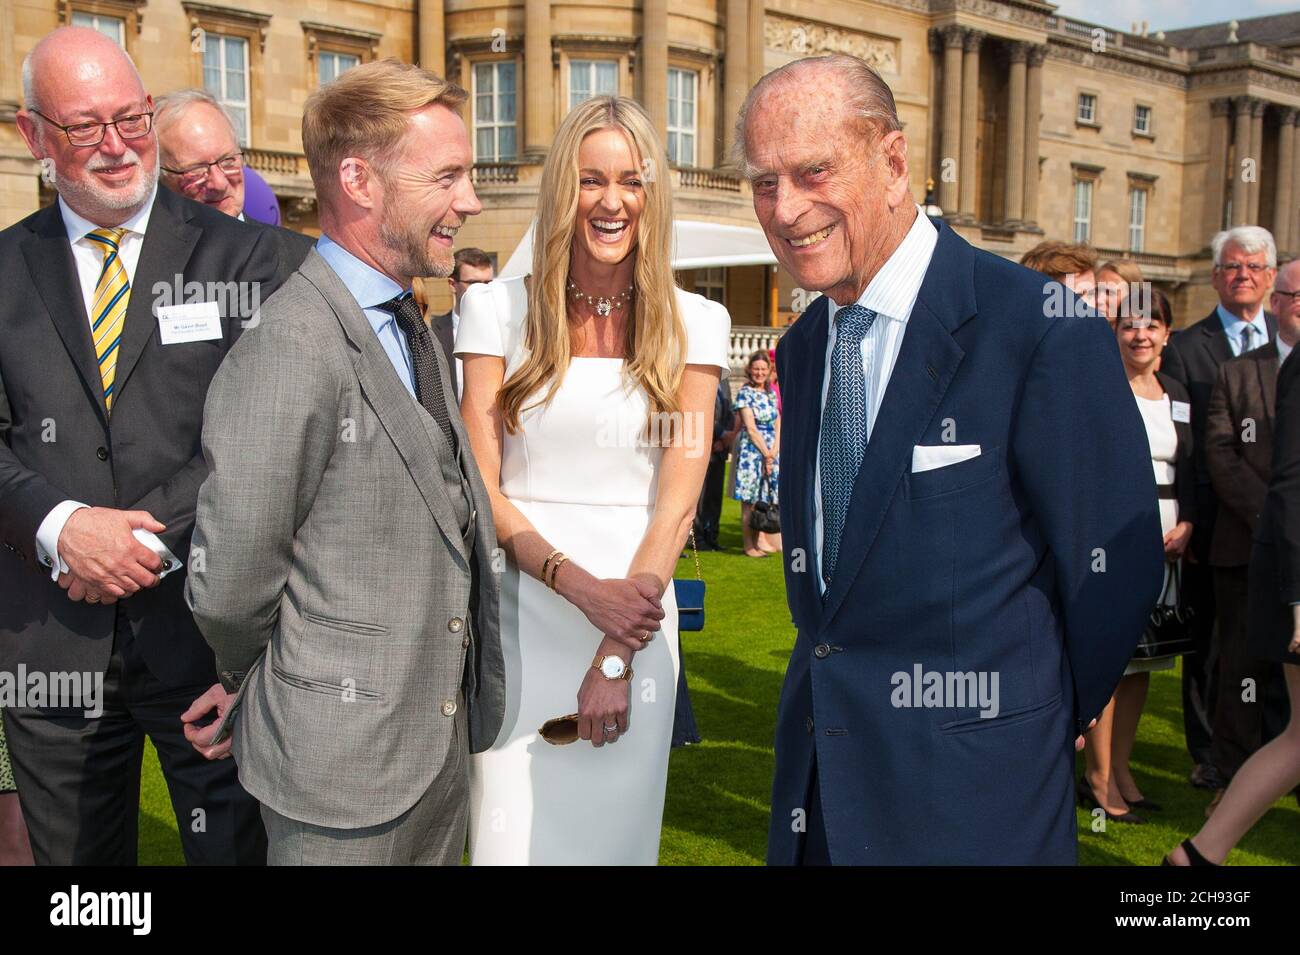 The Duke of Edinburgh (right) speaks with Ronan Keating and his wife Storm at the Duke of Edinburgh Award garden party, at Buckingham Palace, London. Stock Photo